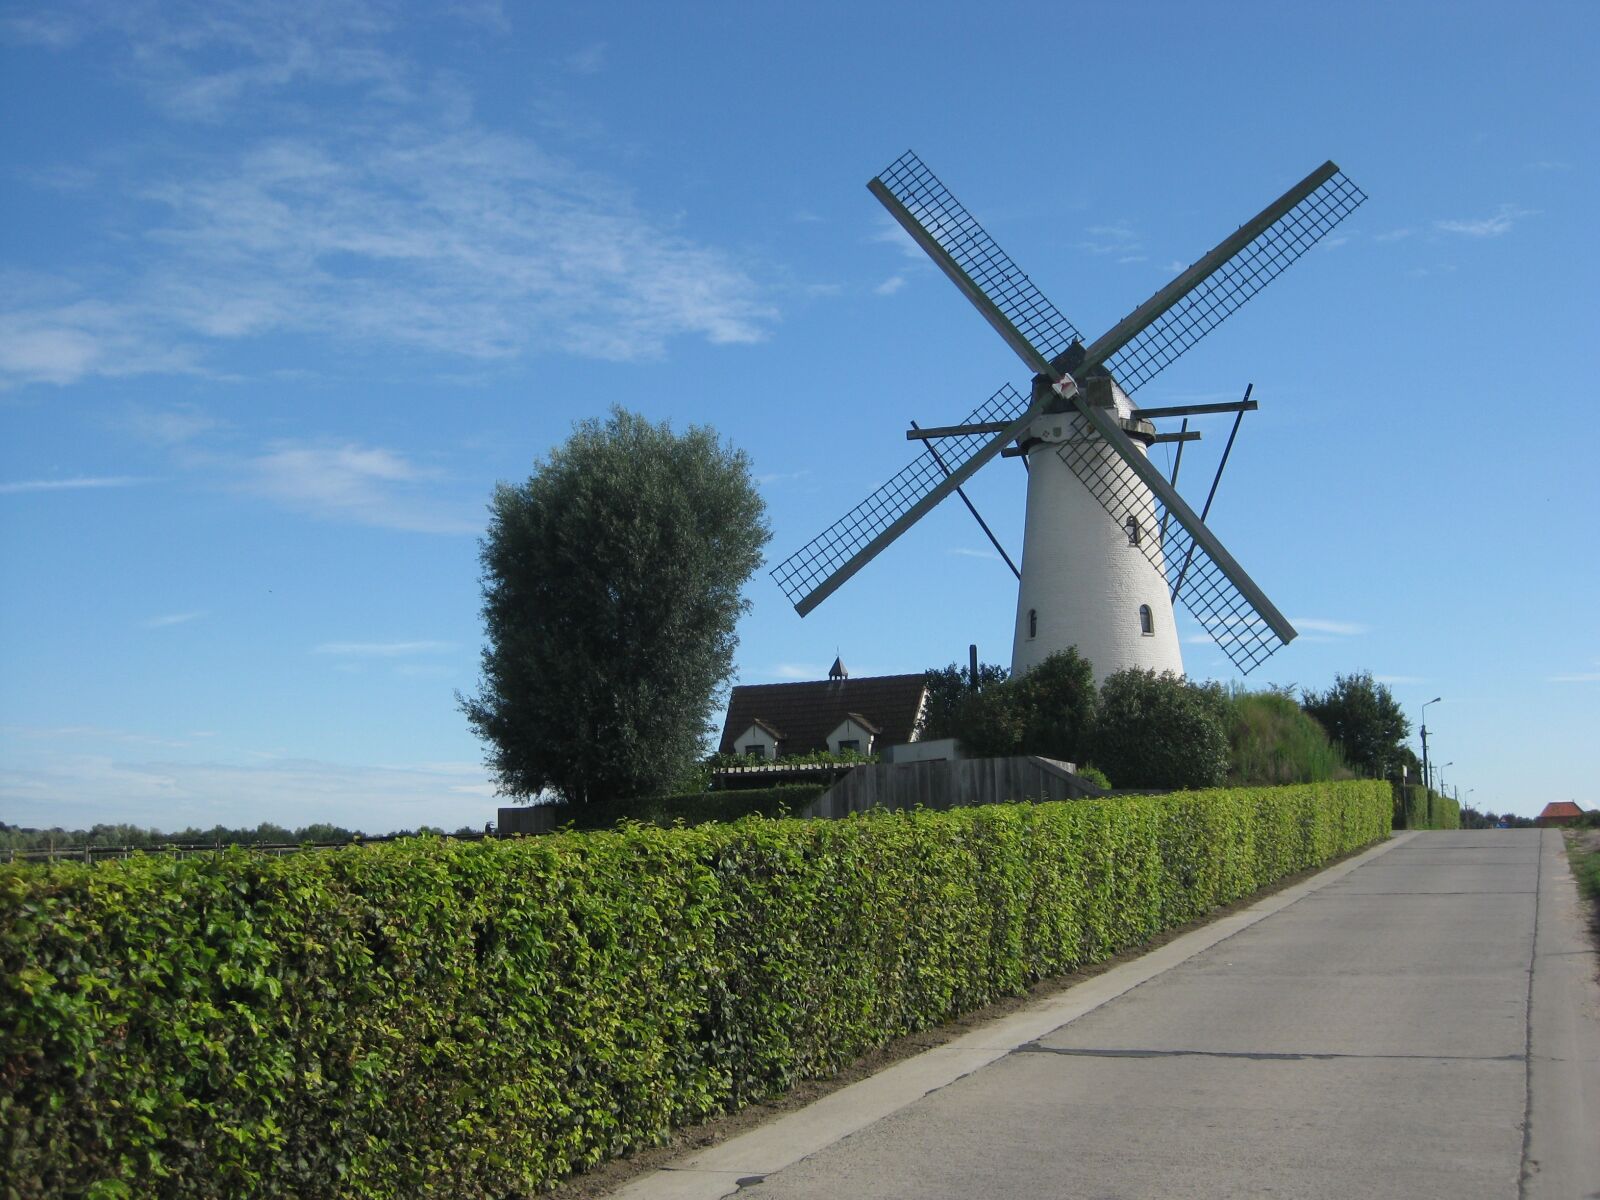 Canon PowerShot SD1100 IS (Digital IXUS 80 IS / IXY Digital 20 IS) sample photo. Wind mill, summer, landscape photography